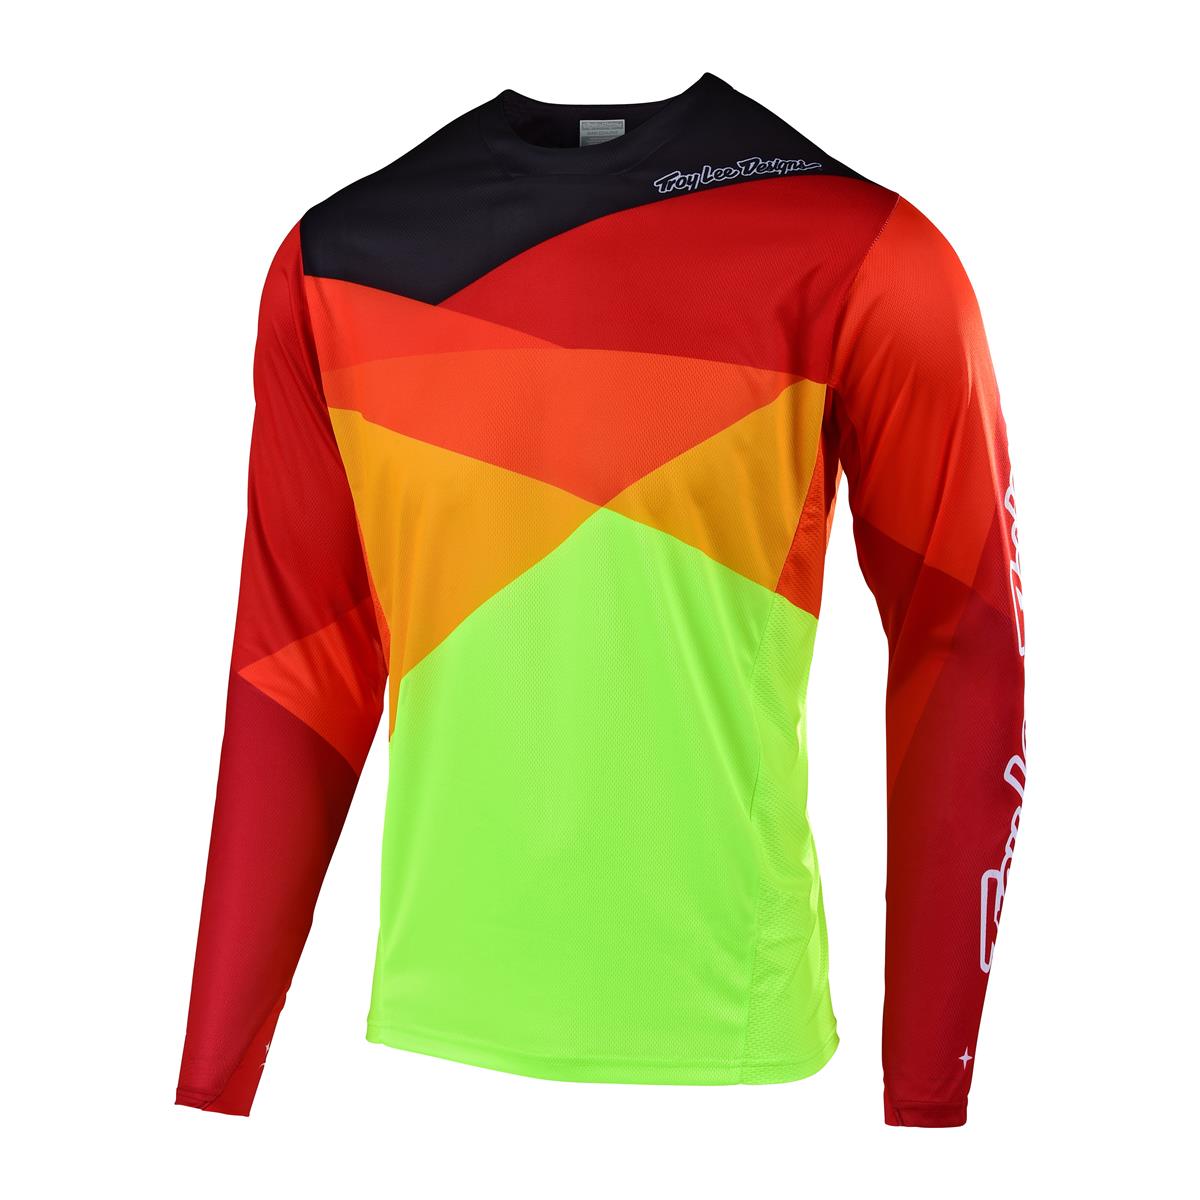 Troy Lee Designs Maillot VTT Manches Longues Sprint Jet - Yellow/Orange